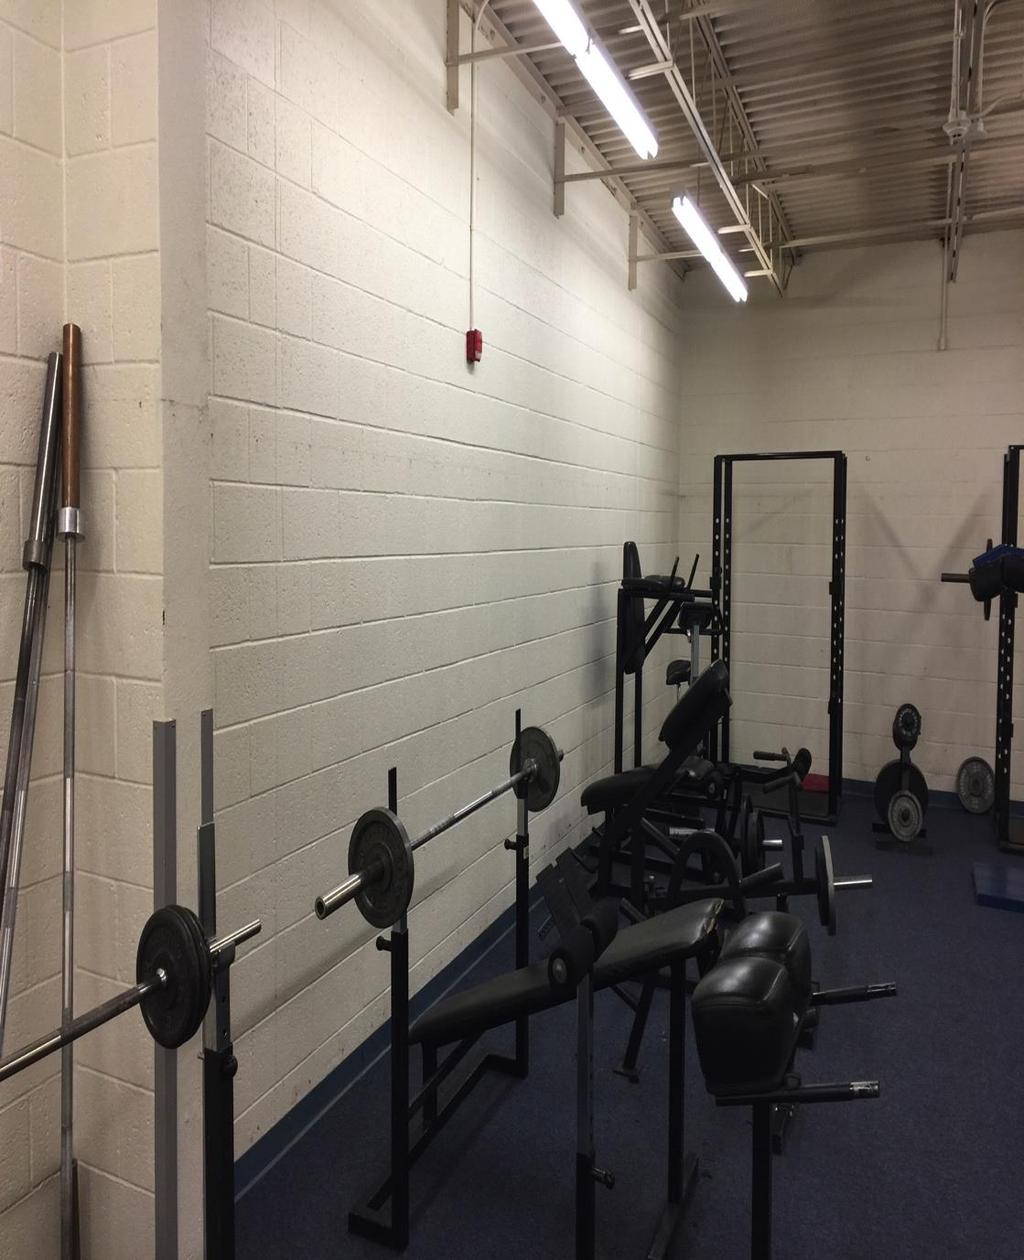 NHS Weight Room Concerns Equipment Spacing: Overall spacing of the equipment in the room is very poor and dangerous No enough space for the 7-foot Olympic